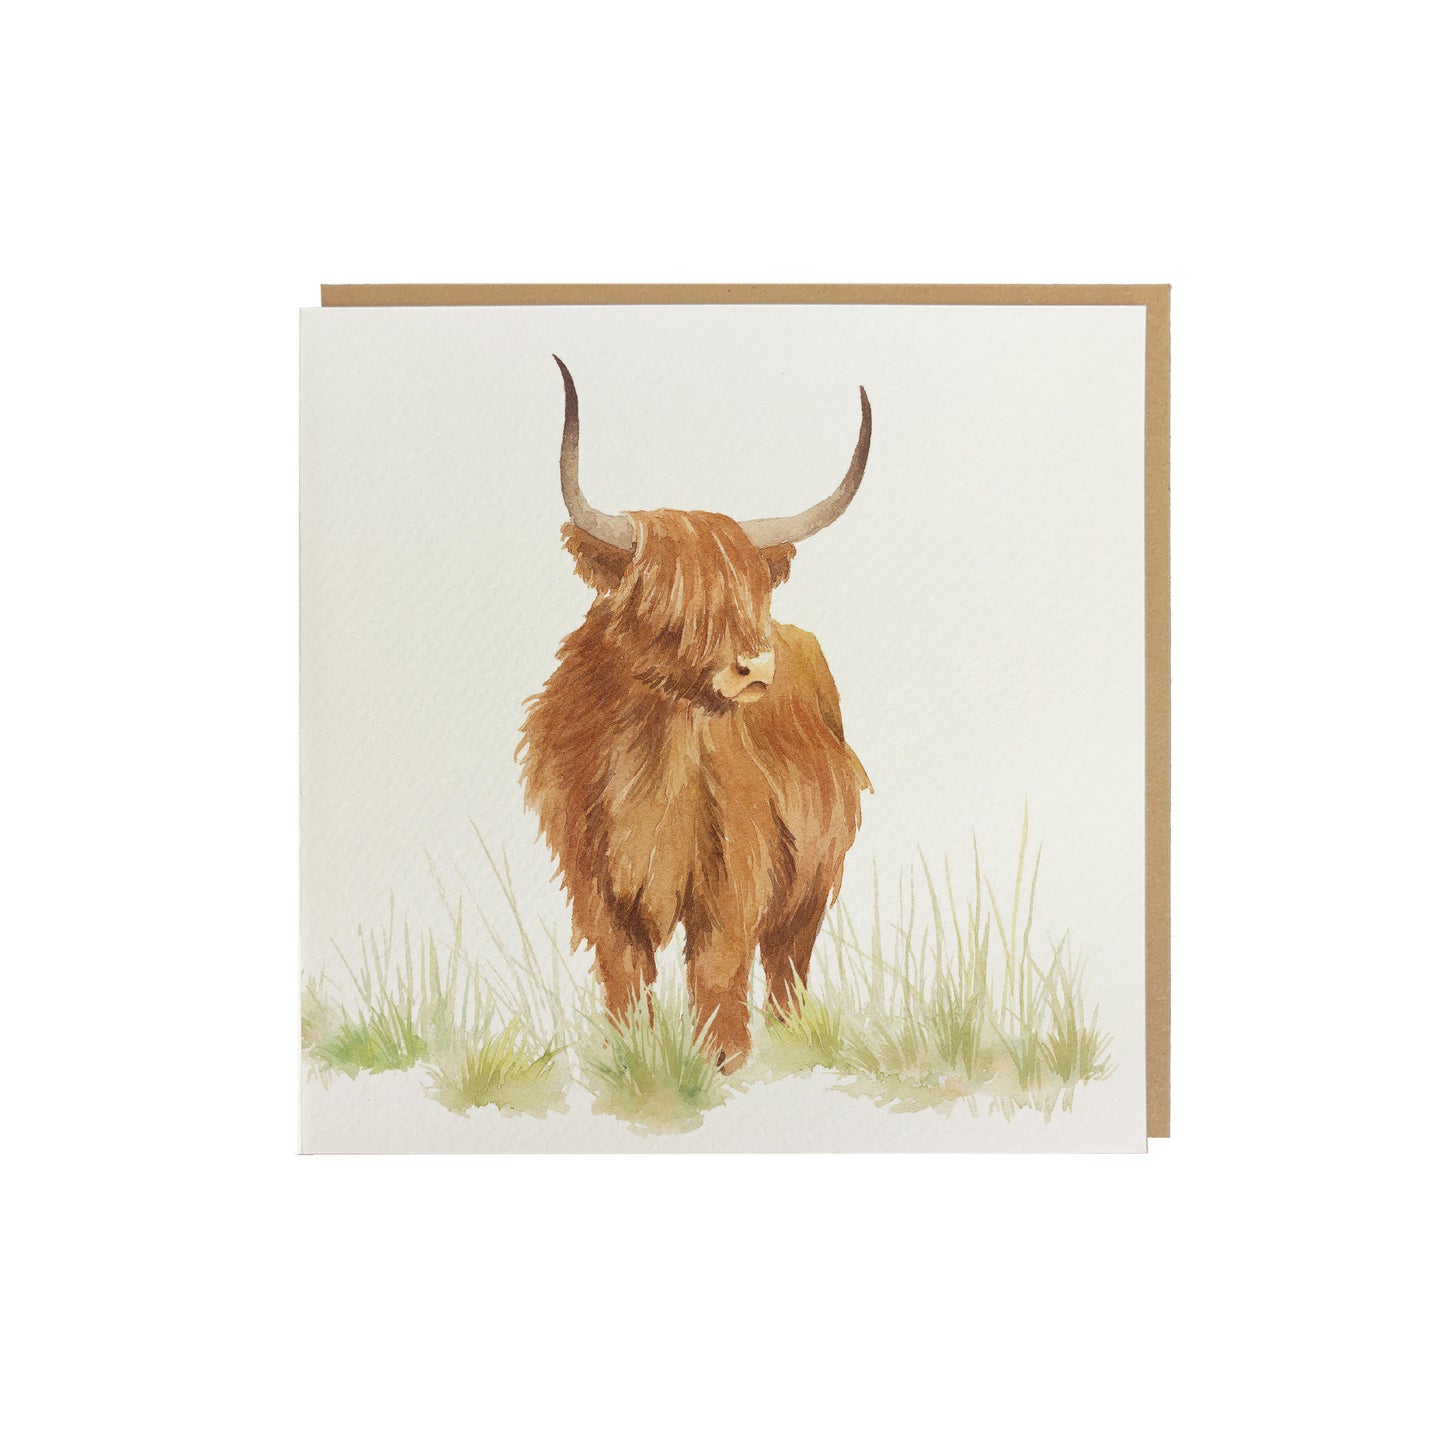 A greetings card featuring a highland cow in a watercolour style. The card has a recyclable brown kraft envelope behind it.